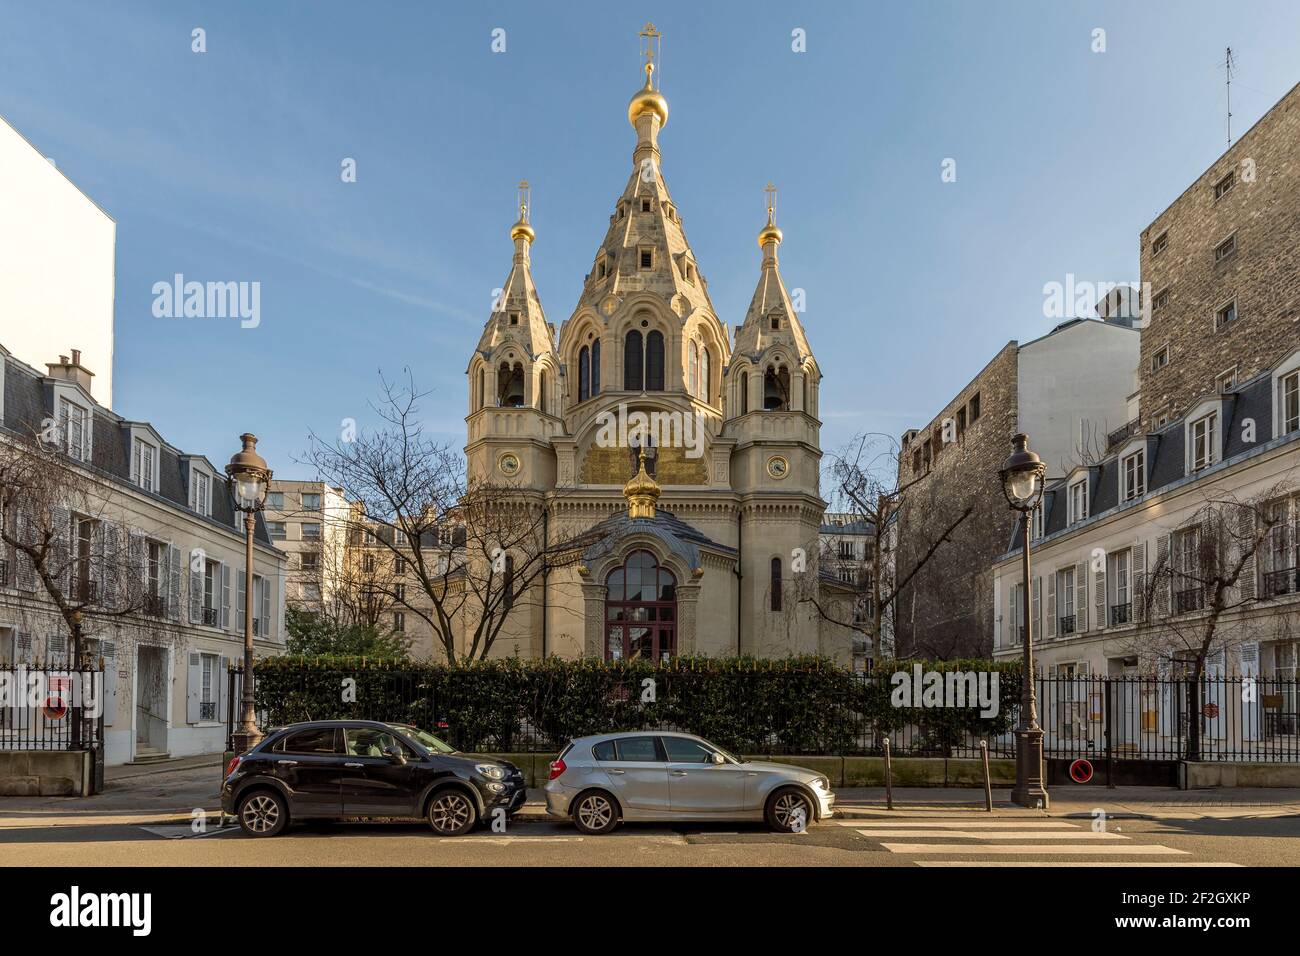 Paris, France - February 19, 2021: The Alexander Nevsky Cathedral is a Russian Orthodox cathedral church located in the 8th arrondissement of Paris. I Stock Photo